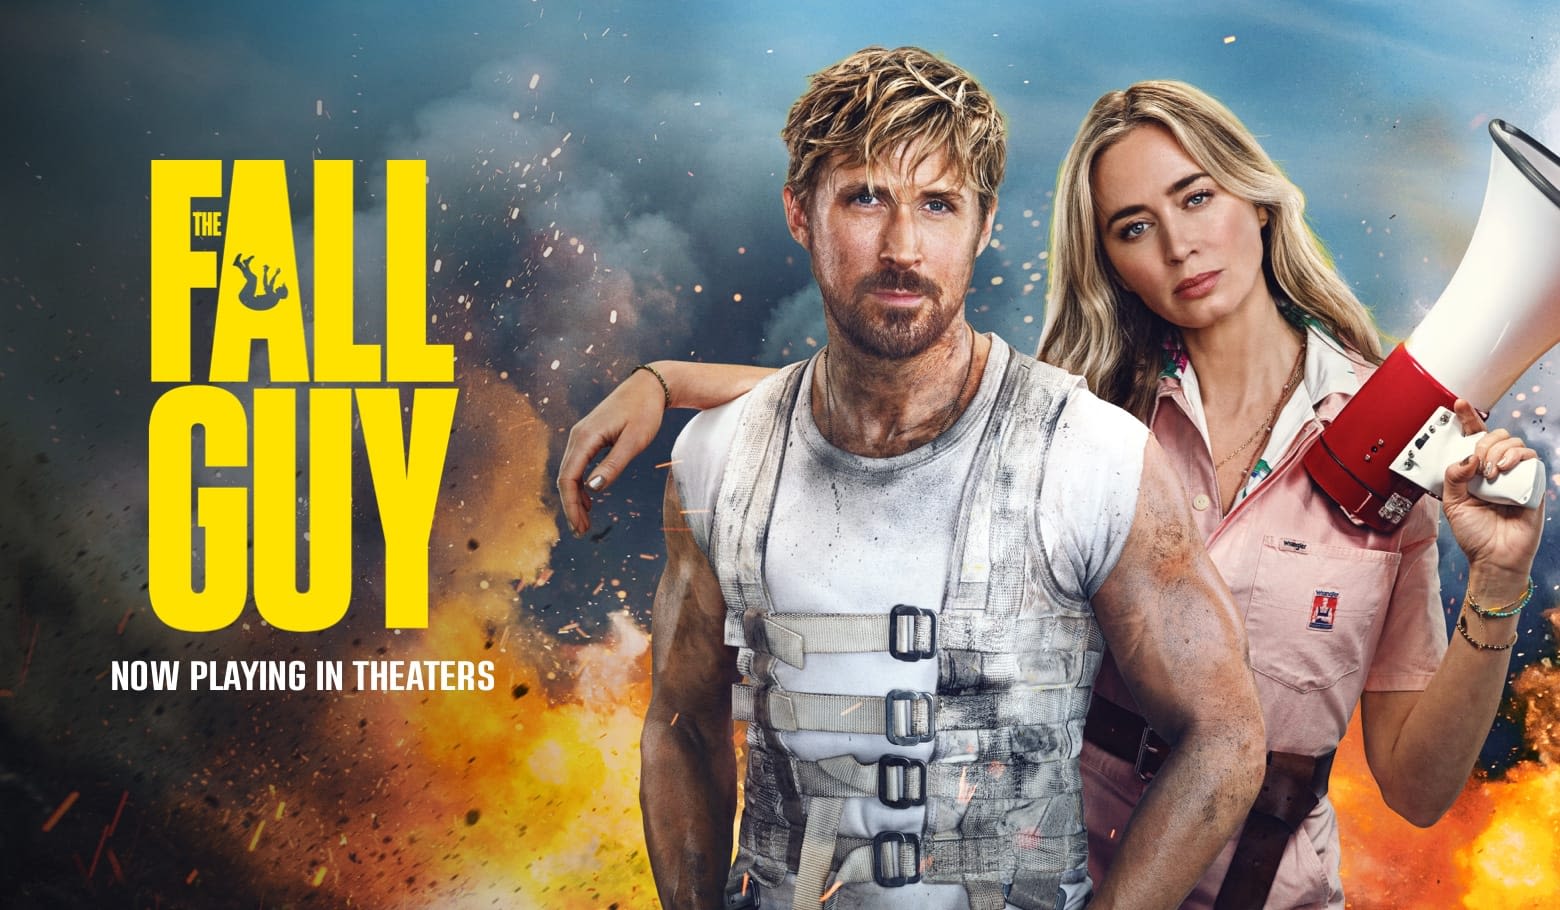 Ryan Gosling-Emily Blunt "Fall Guy" Going to Home Video Tomorrow After Very Short Run, Just 19 Days in Theaters - Showbiz411